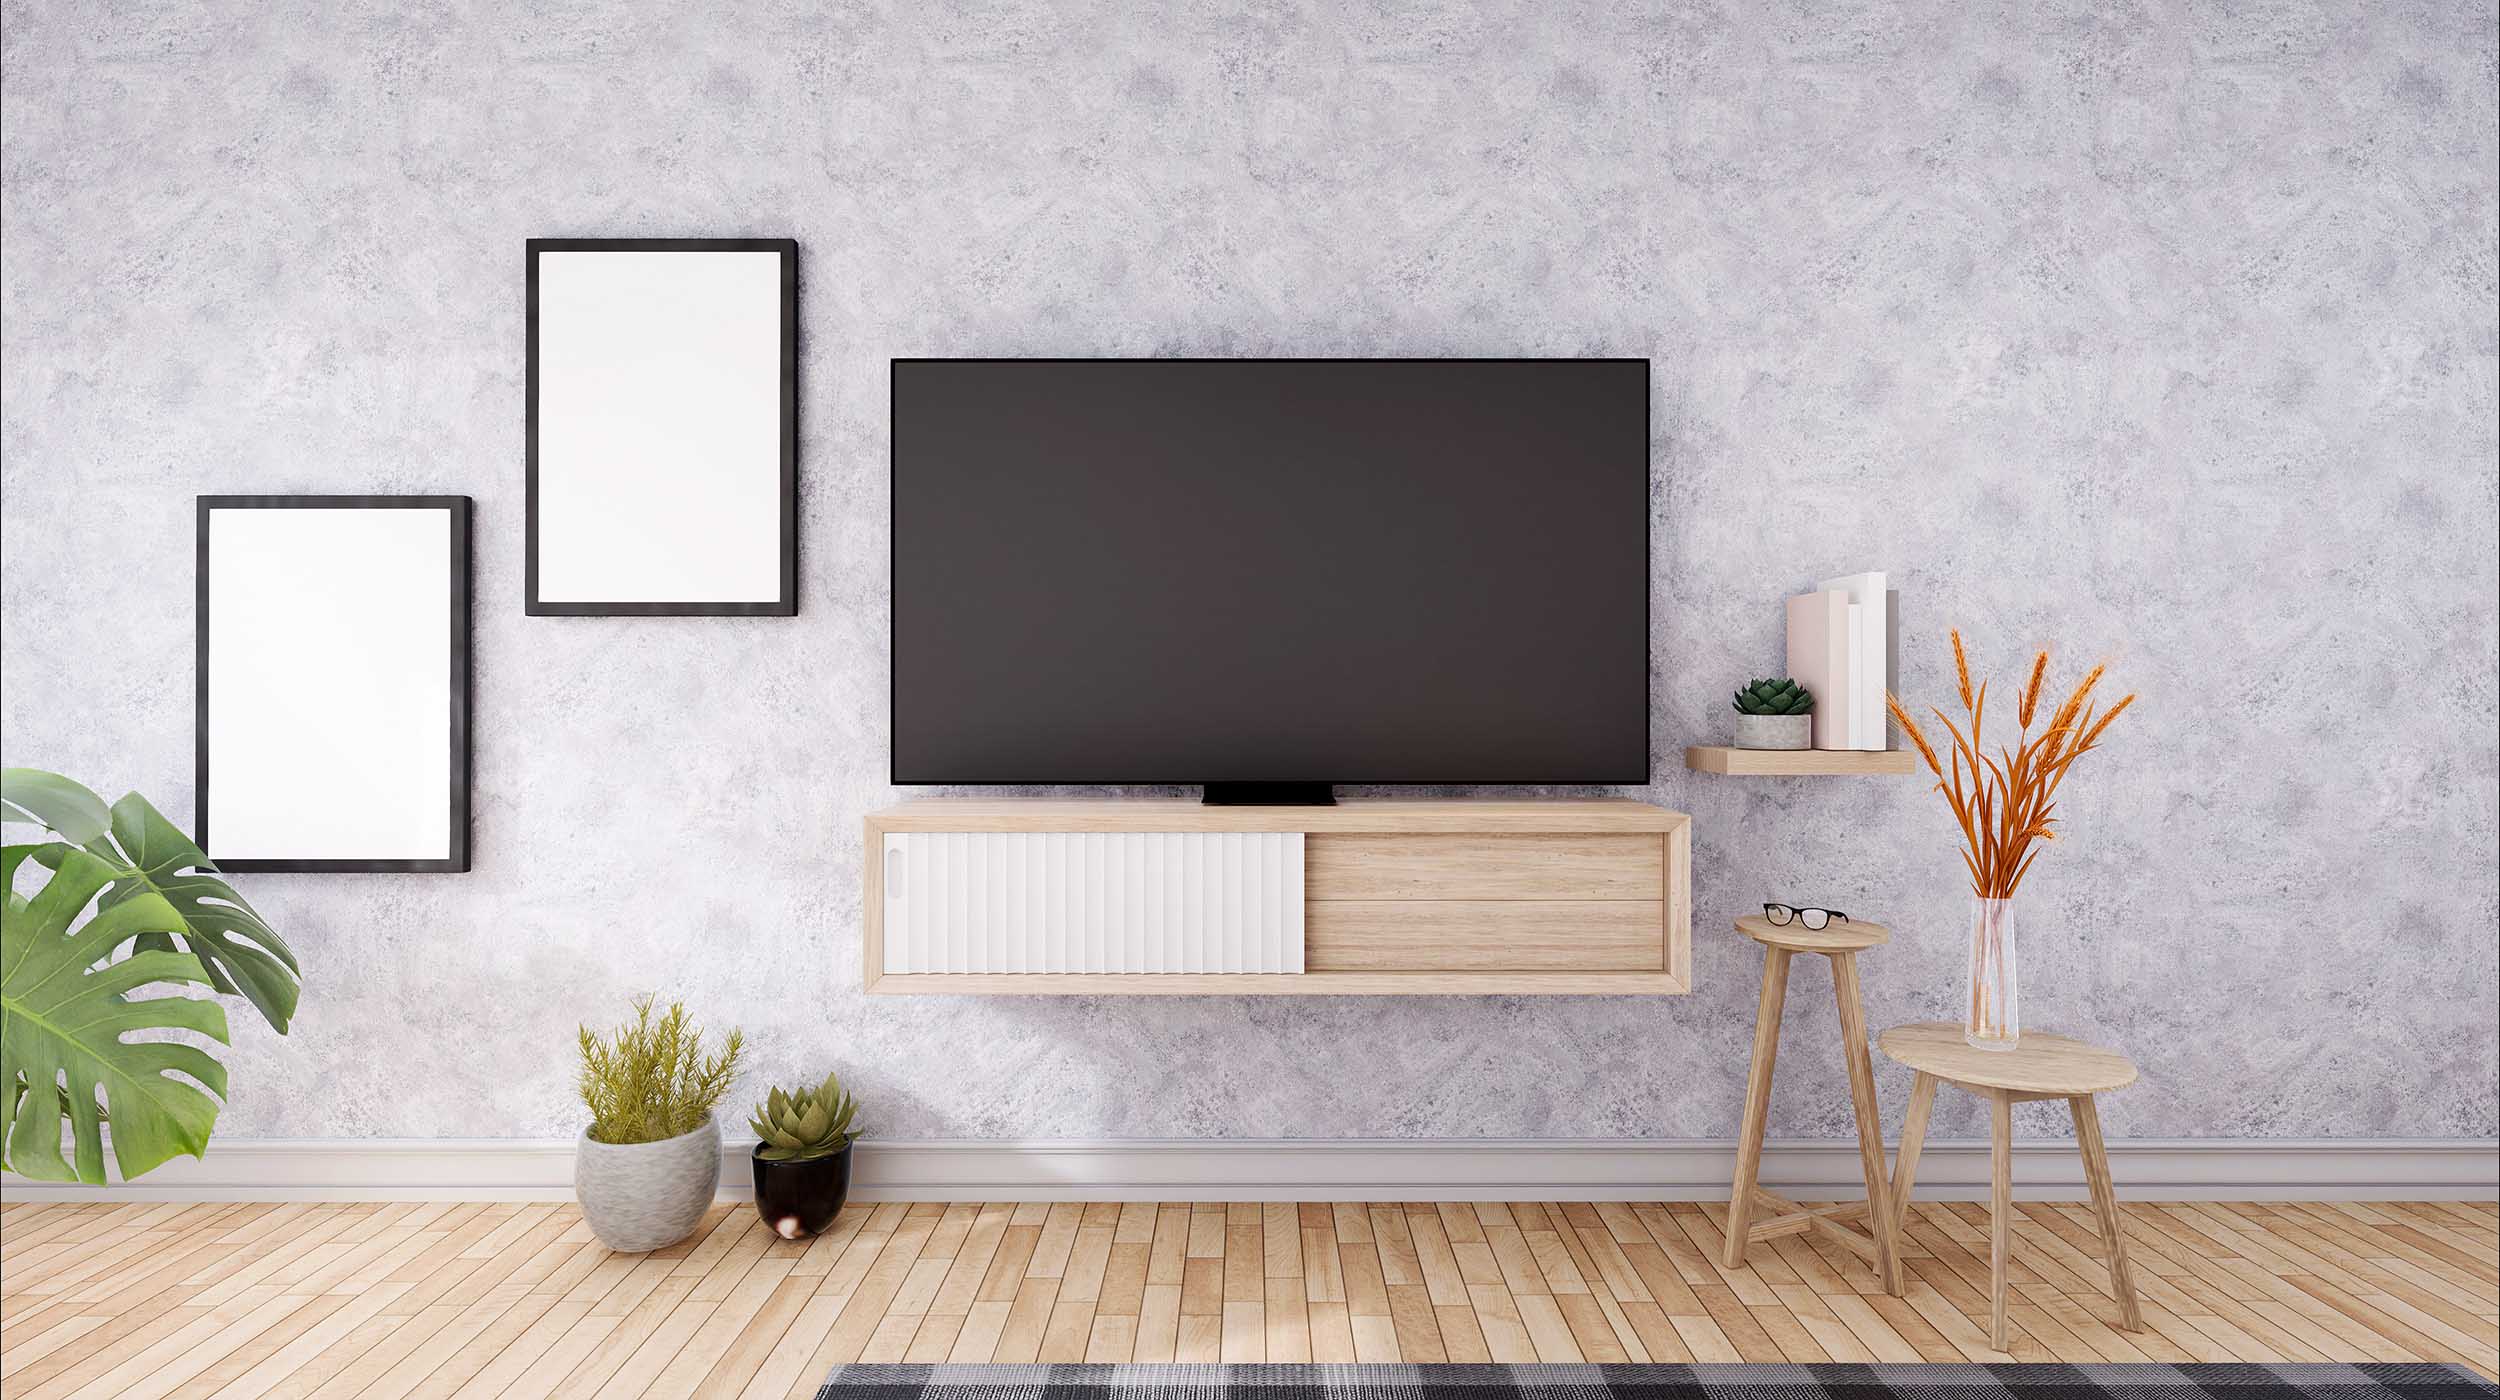 Can my TV be wall mounted?